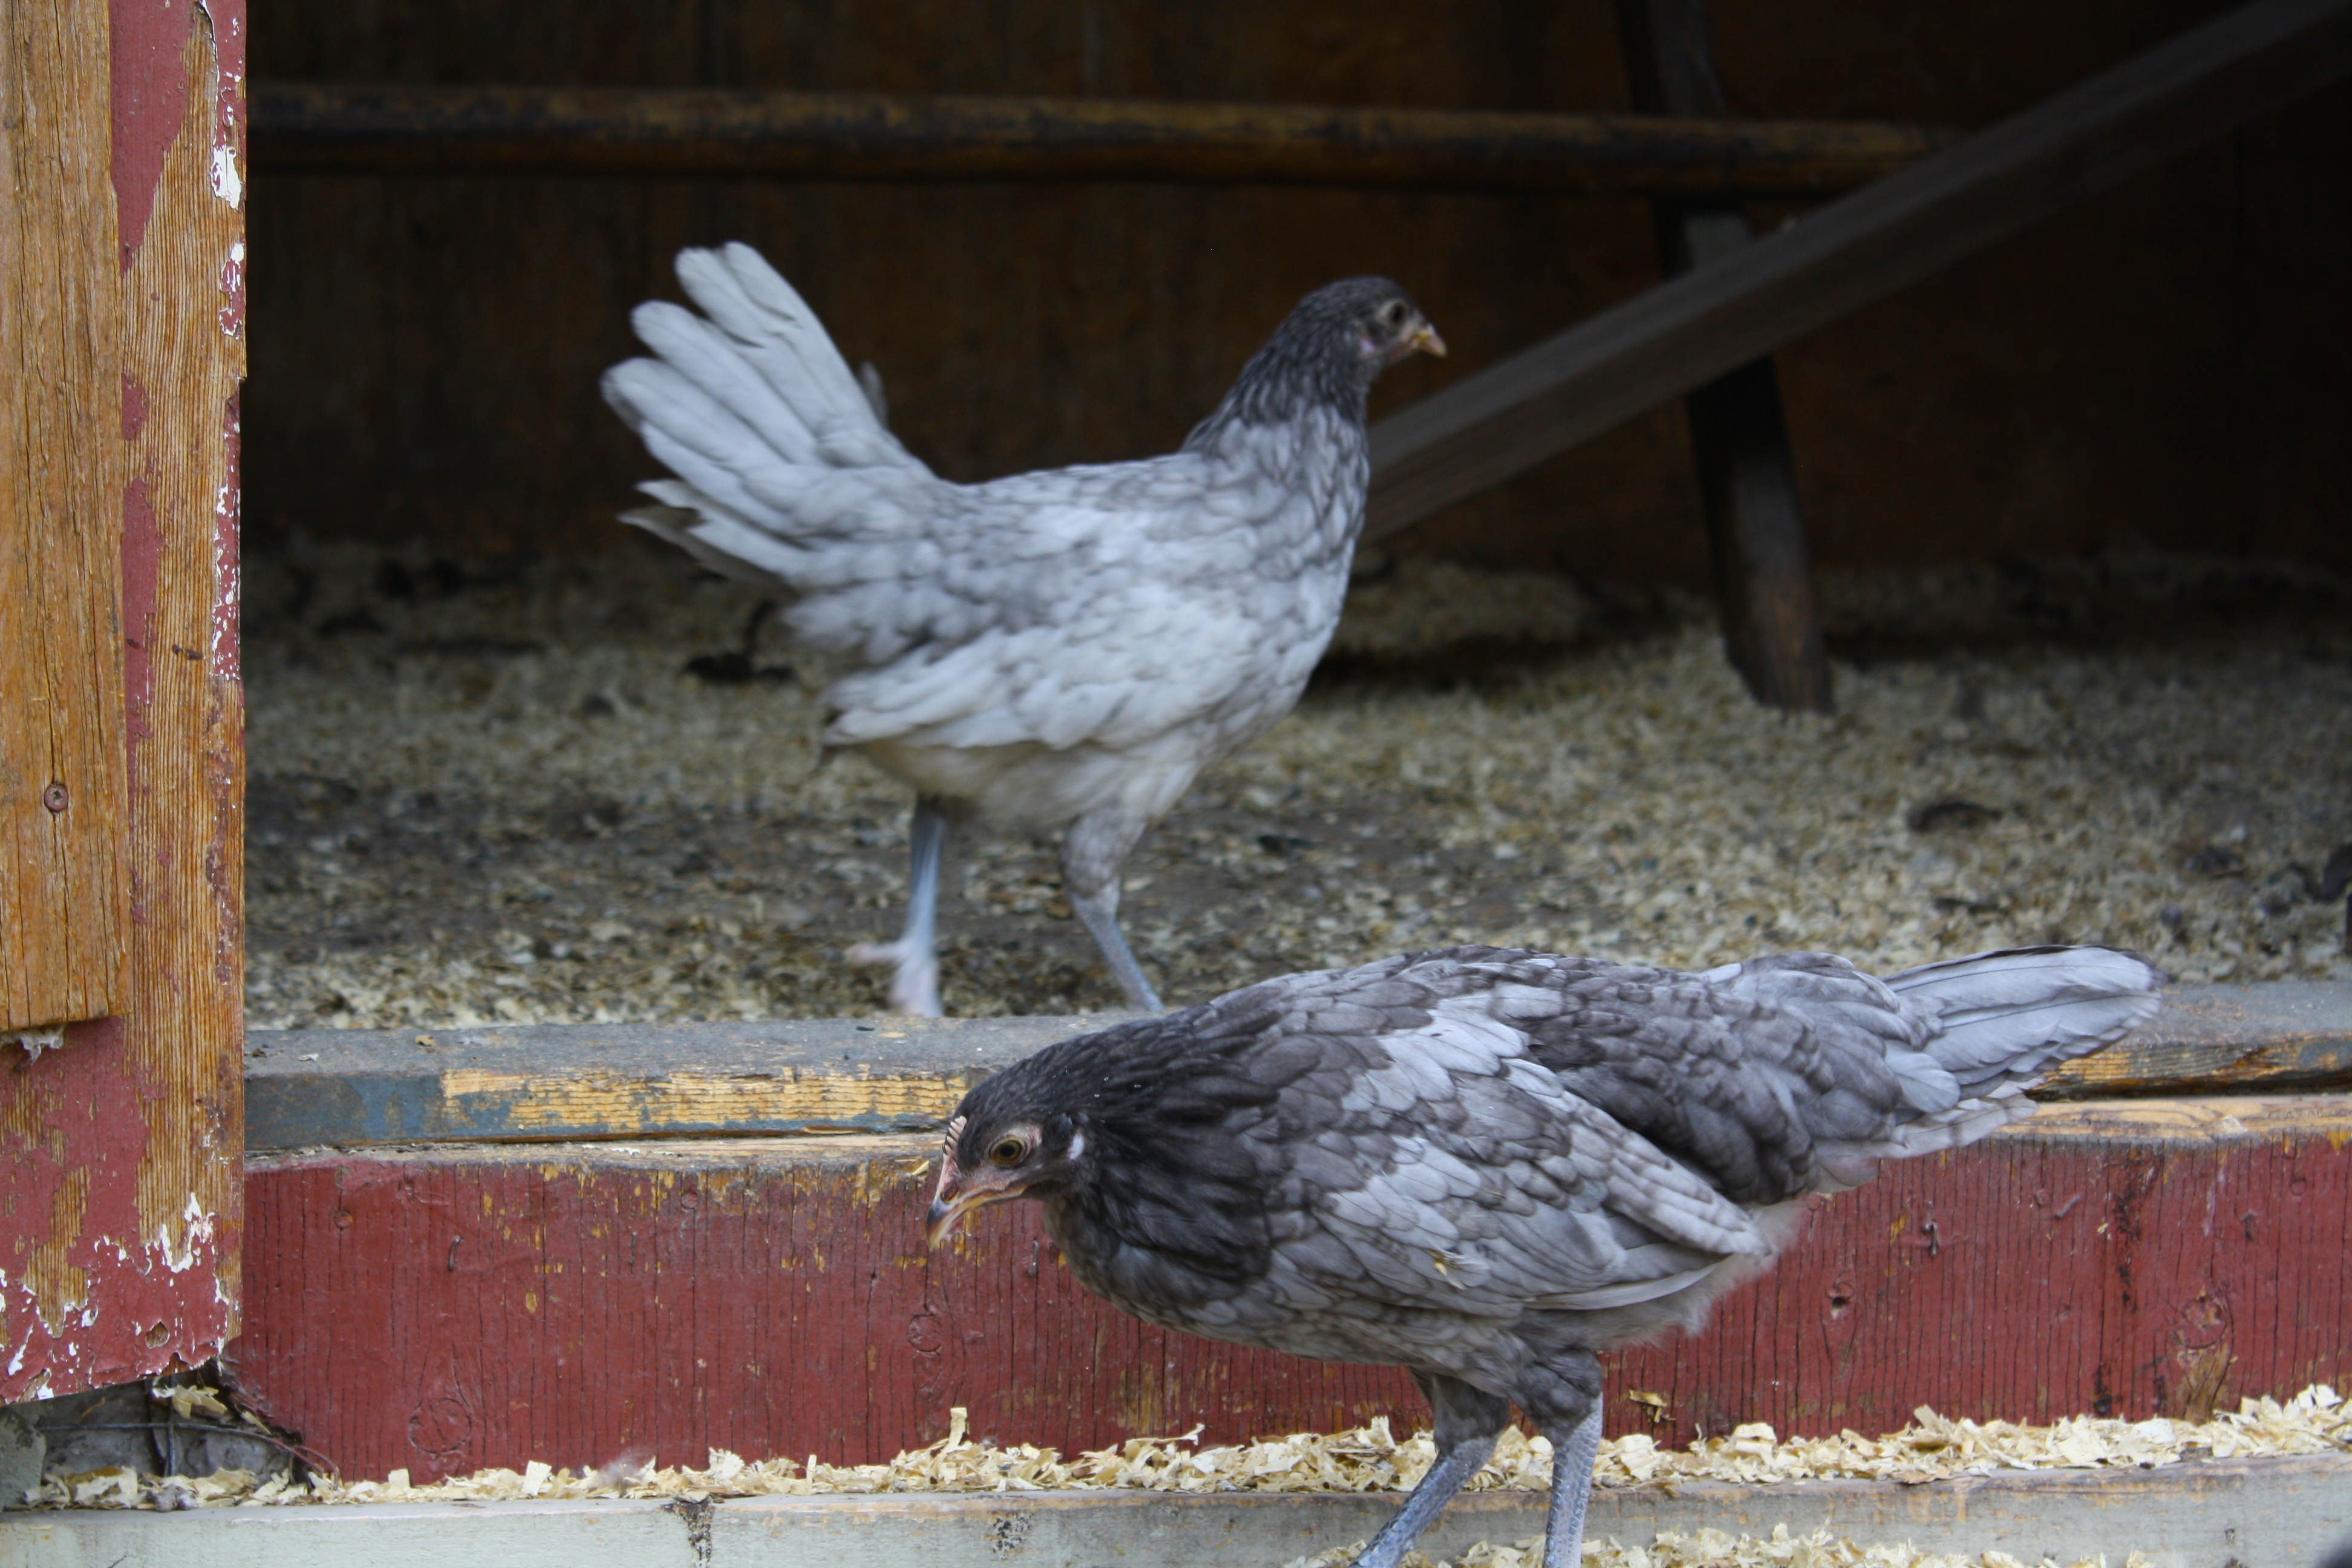 Two of my Andalusian pullets. Very friendly girls and like to fly but stay close to the coop. Haven't had any eggs from them yet.